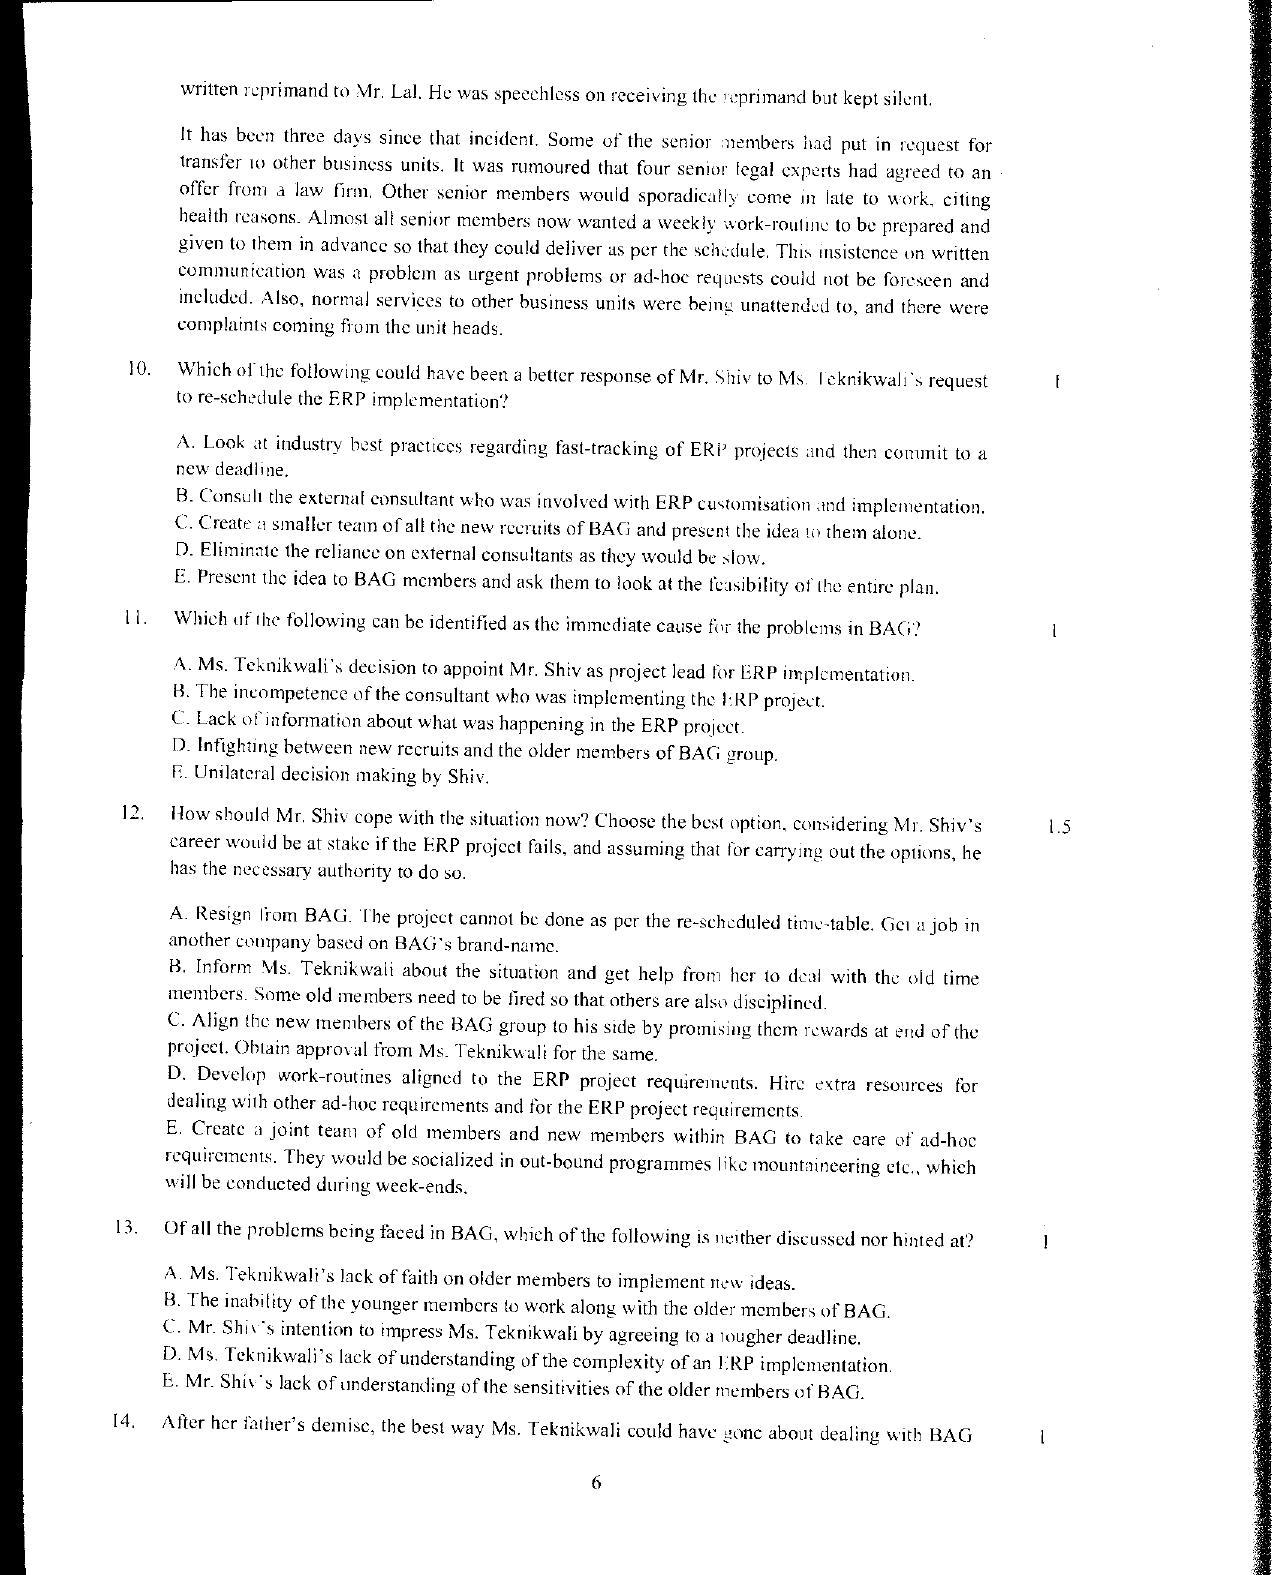 XAT 2012 Question Papers - Page 7